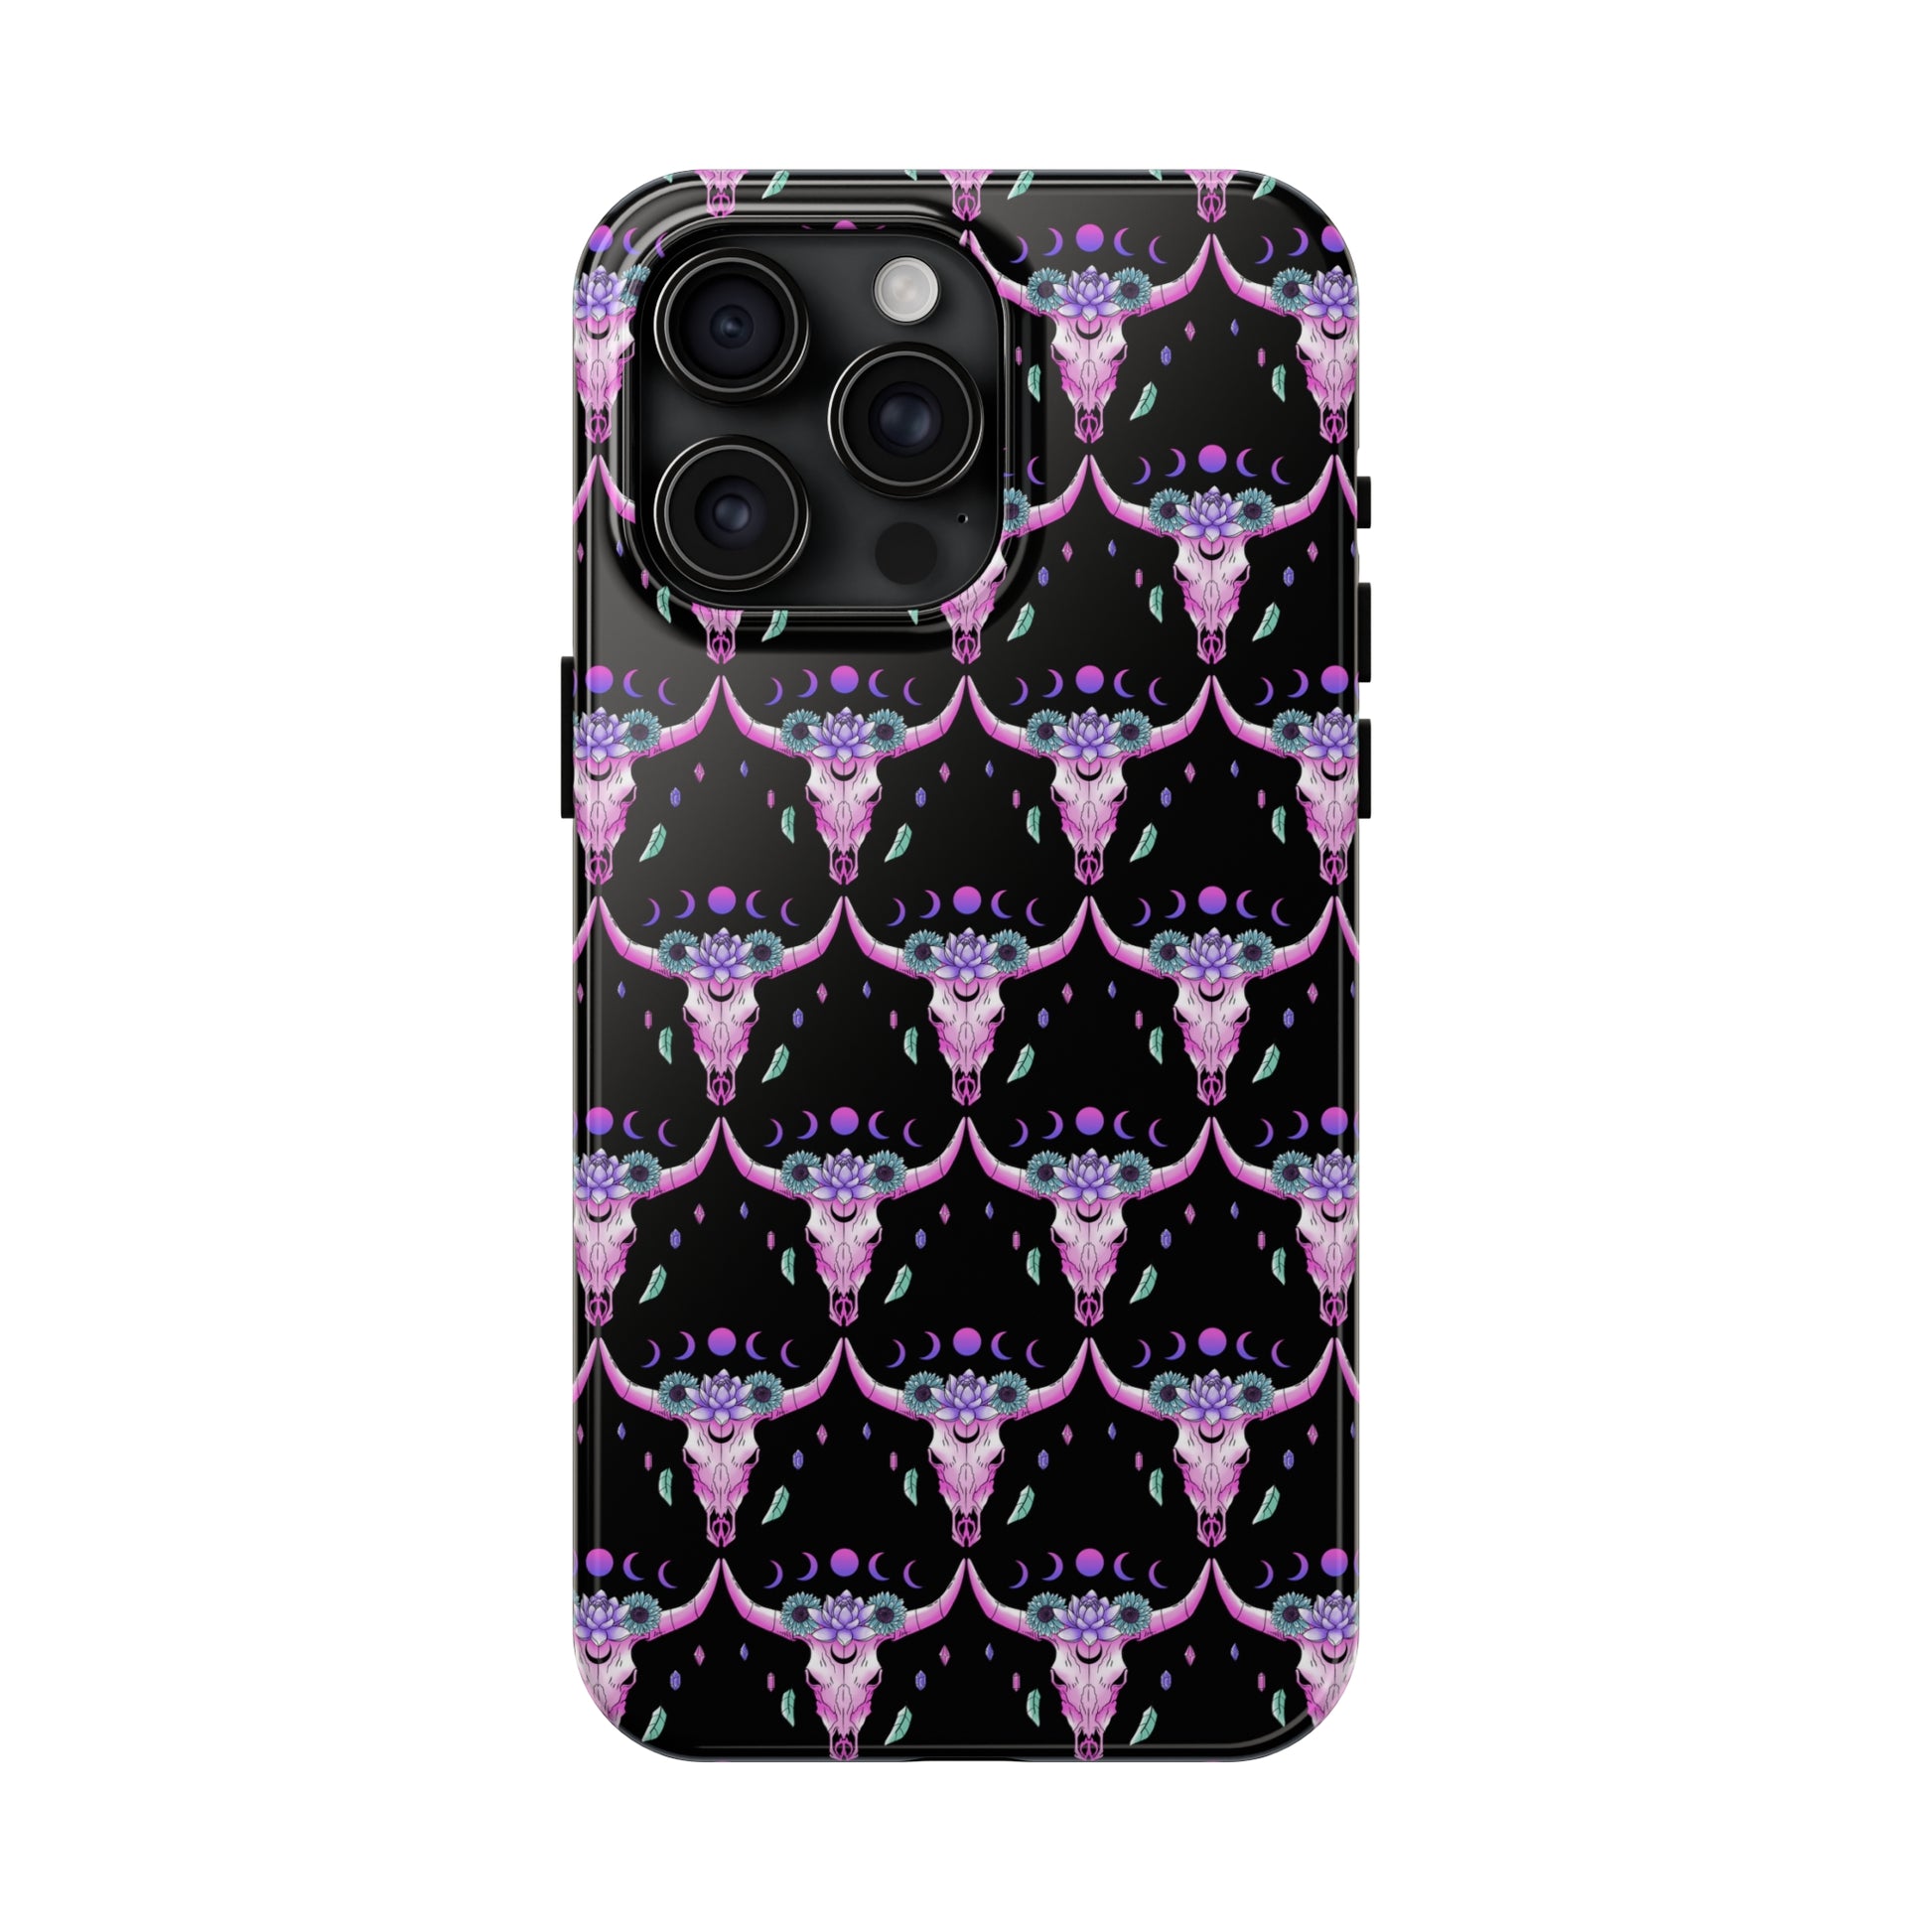 Crystal Skull Moon: iPhone Tough Case Design - Wireless Charging - Superior Protection - Original Graphics by TheGlassyLass.com